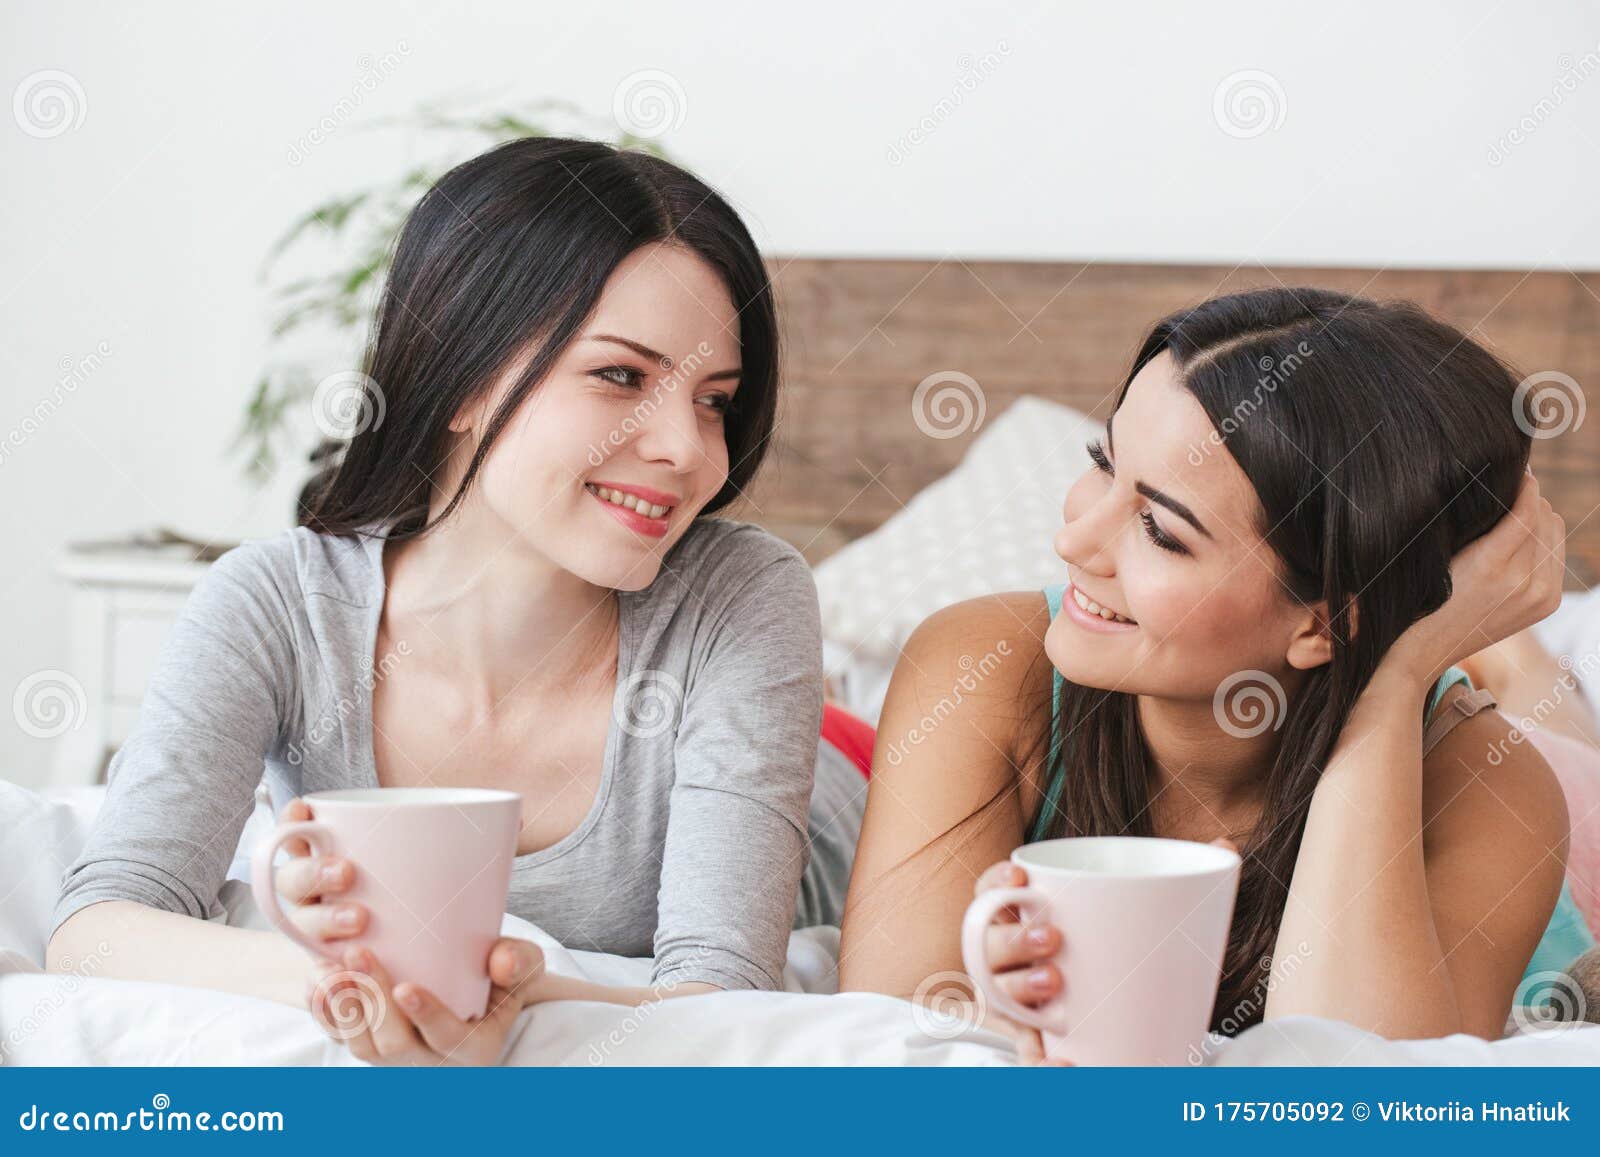 Lesbian Couple In Bedroom At Home Lying Drinking Tea